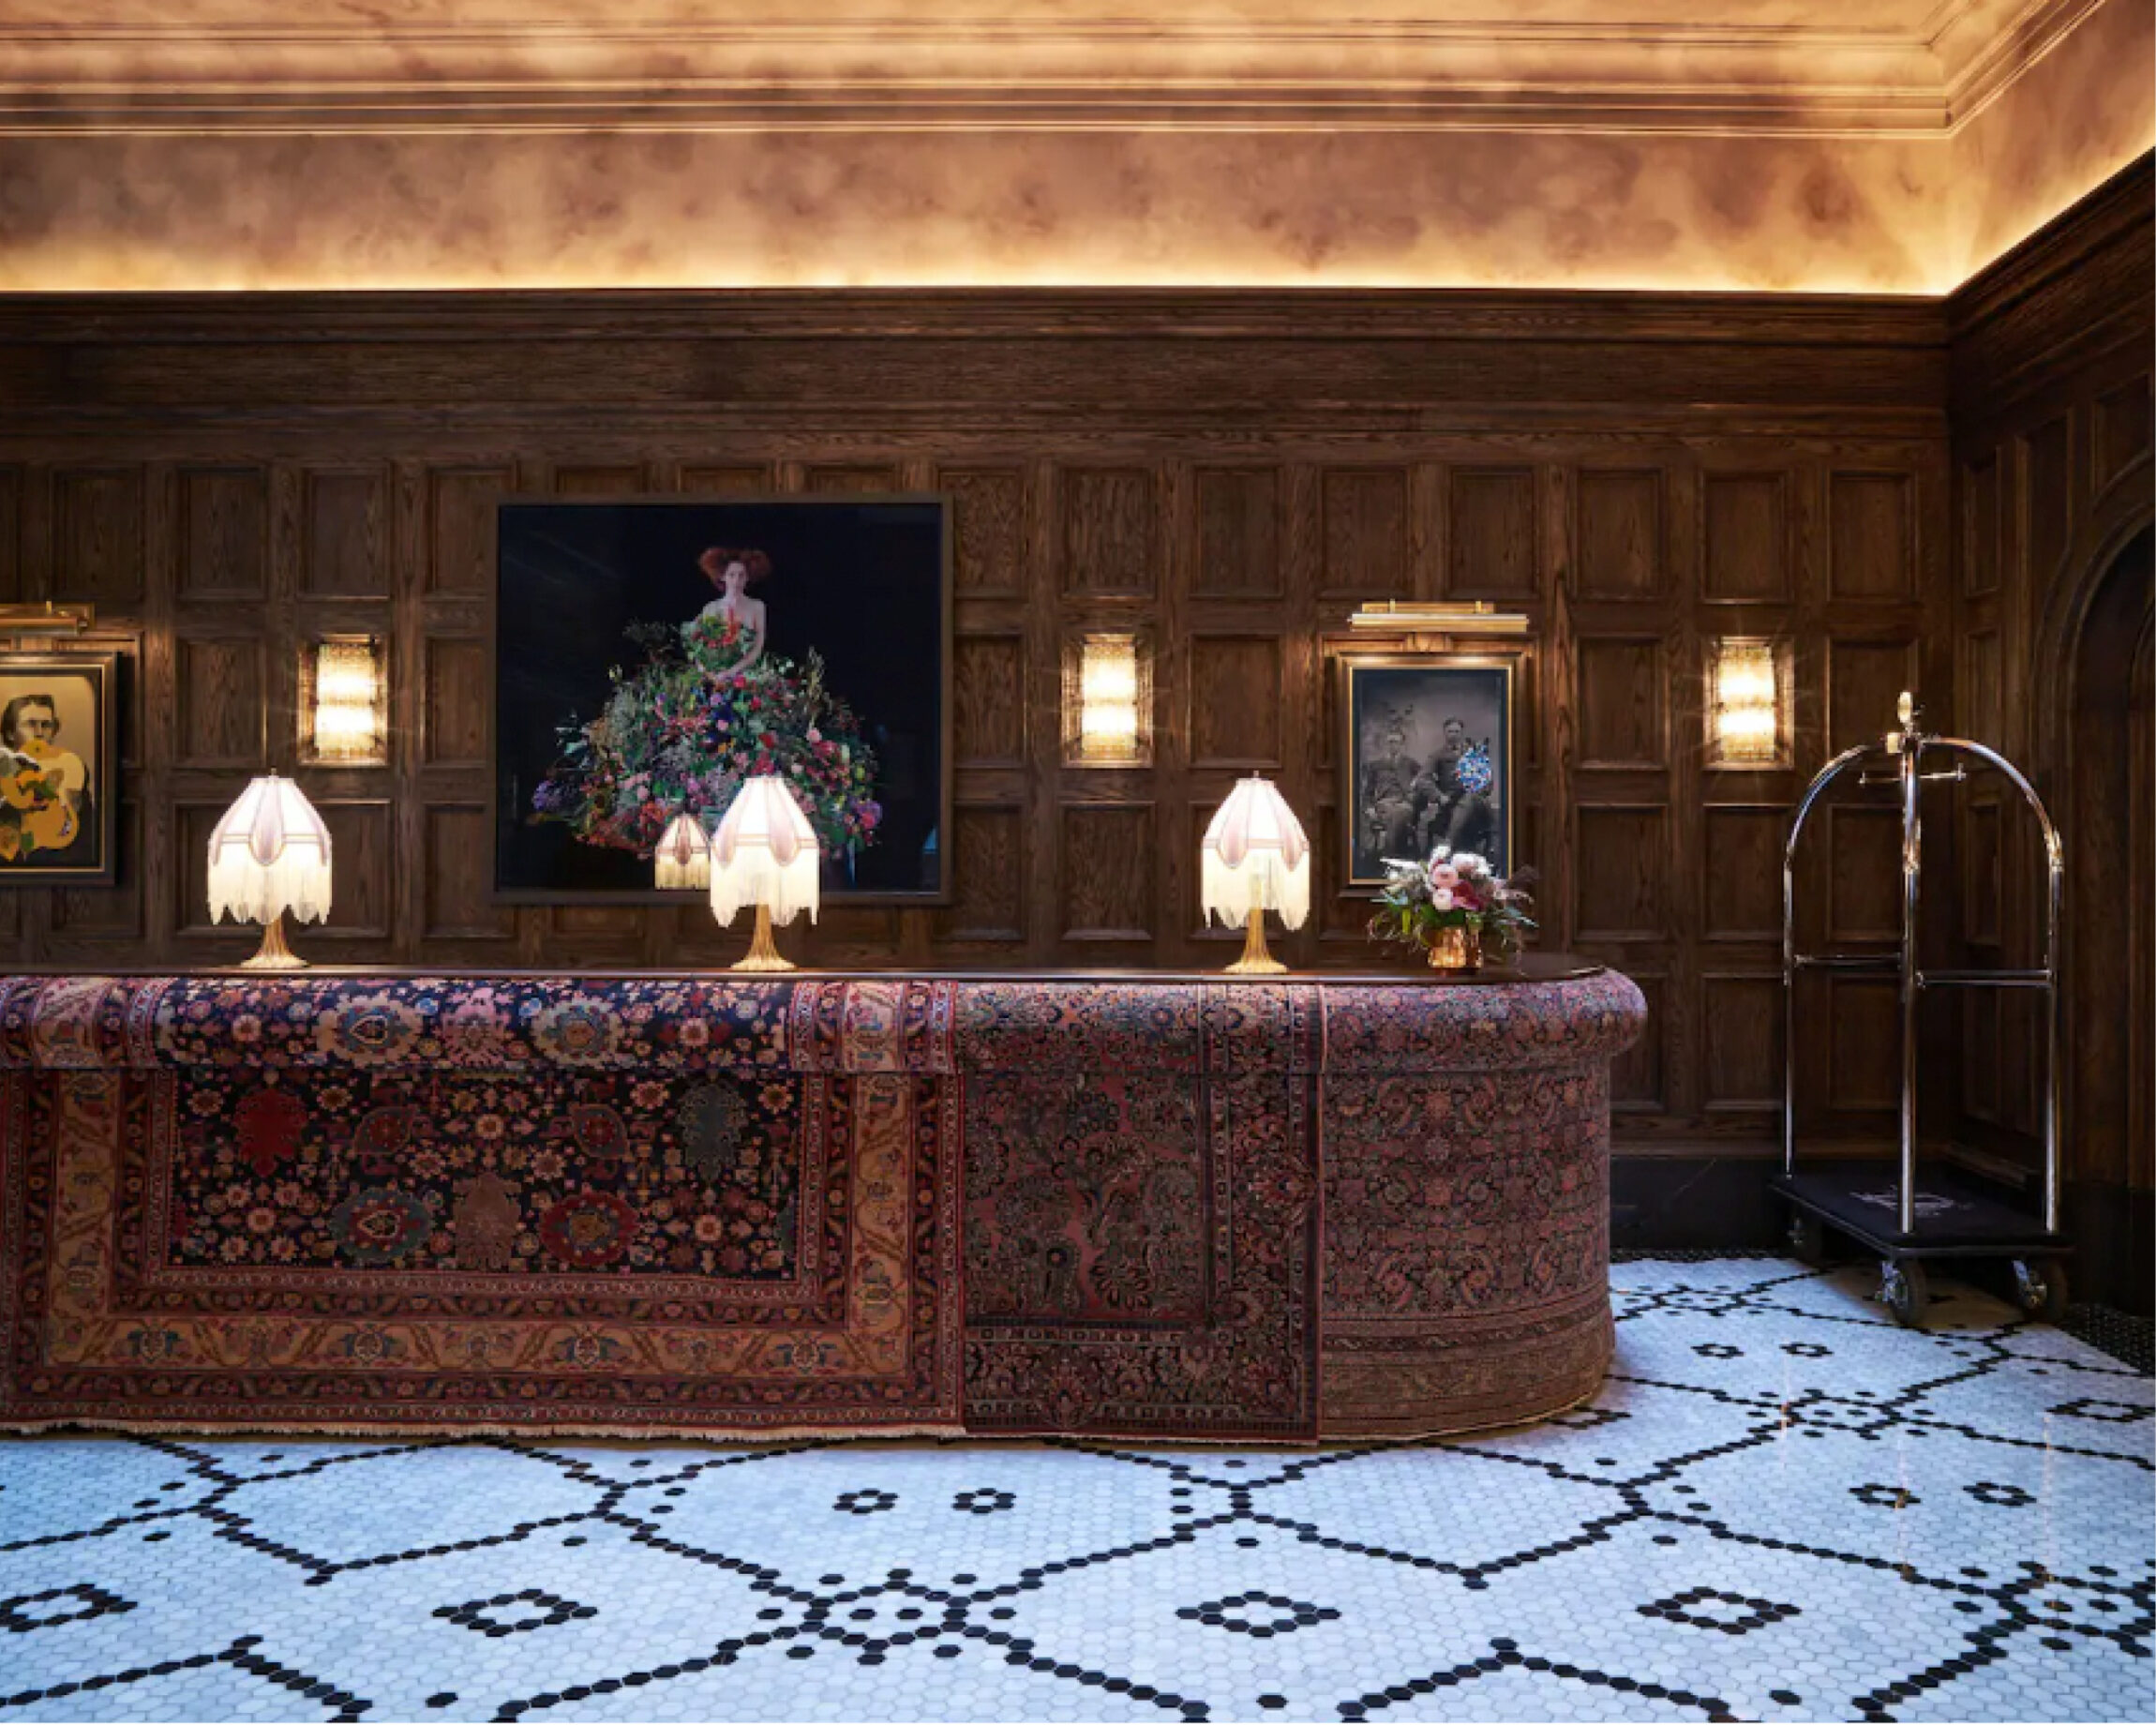 The best co-working spaces for remote working in New York City | The lobby of the Beekman with classic New York tile and run tapestry lining the reception desk.